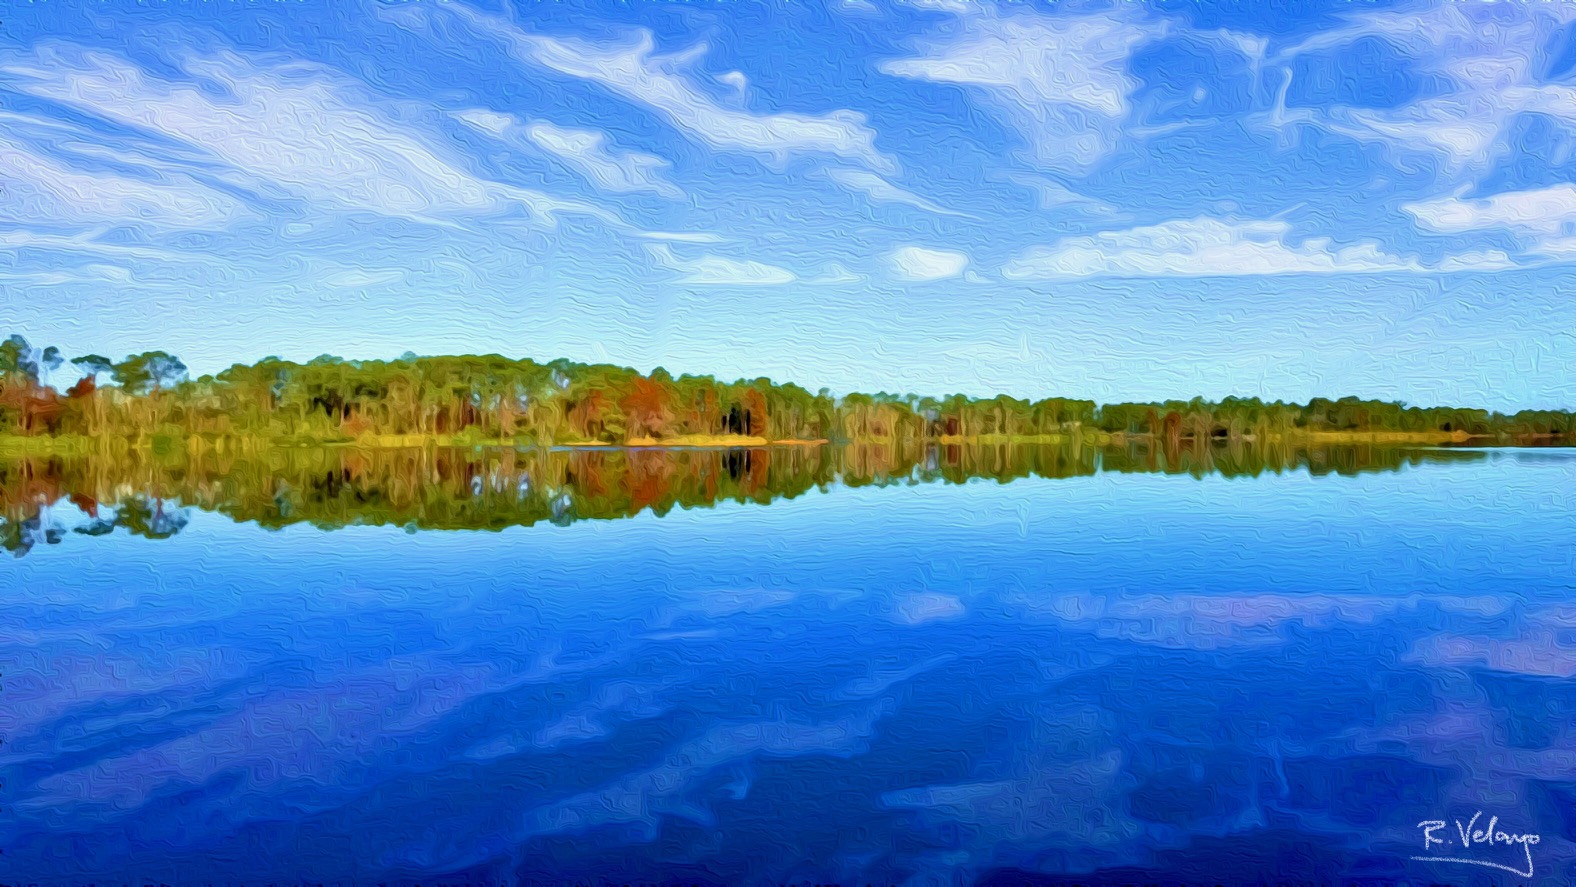 "THE SKY'S REFLECTION ON OLD LAKE DAVENPORT" [Created: 4/29/2021]